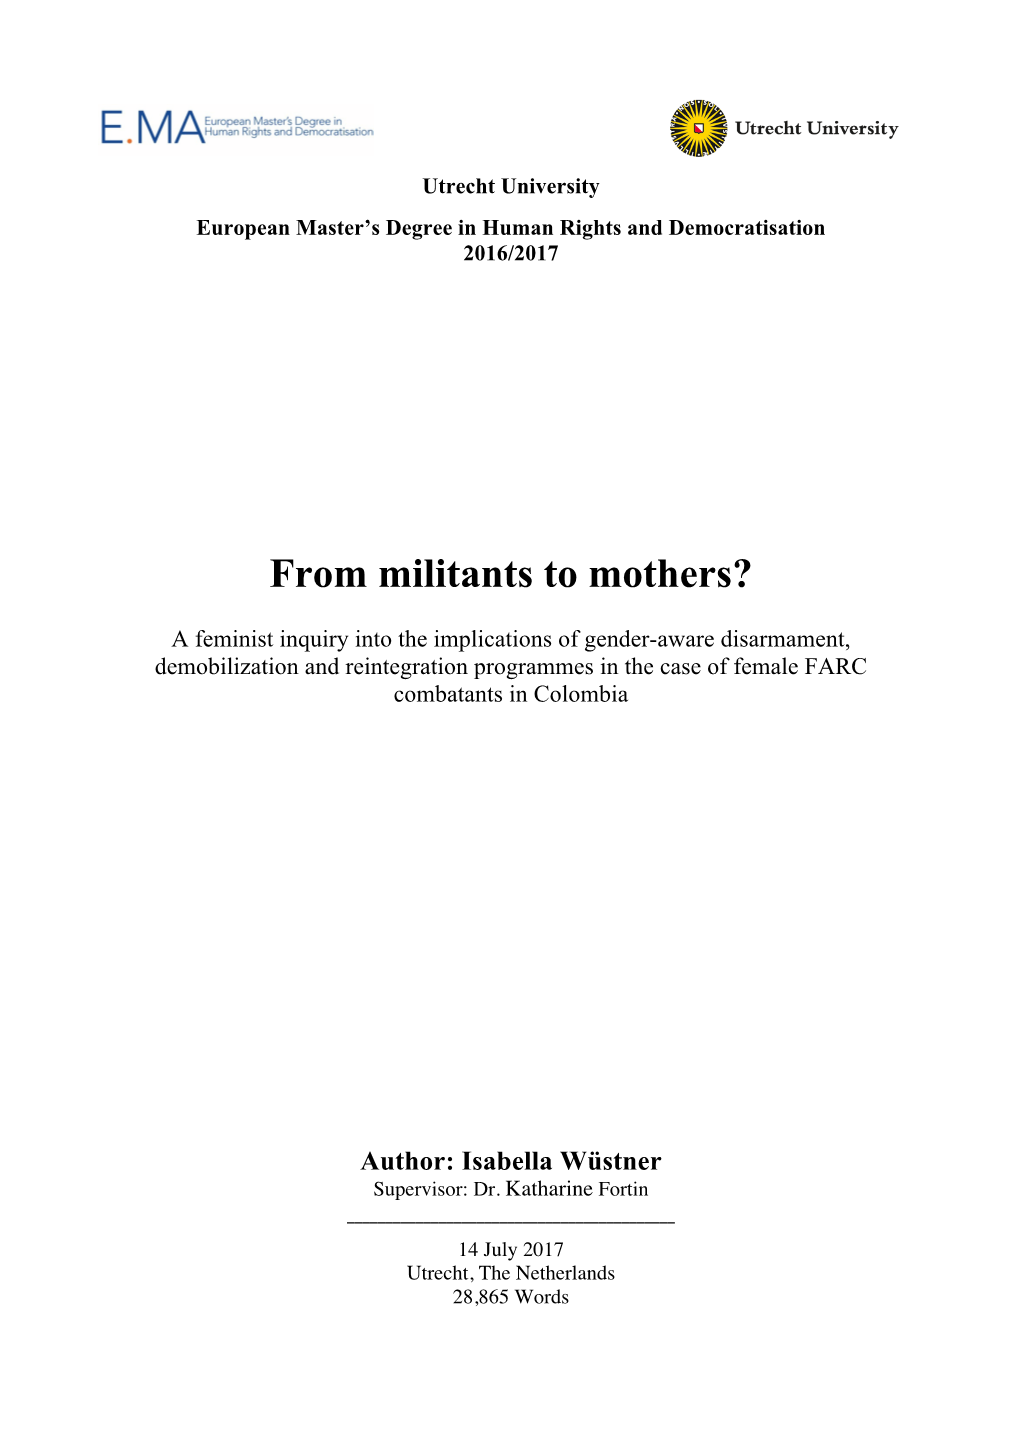 From Militants to Mothers?